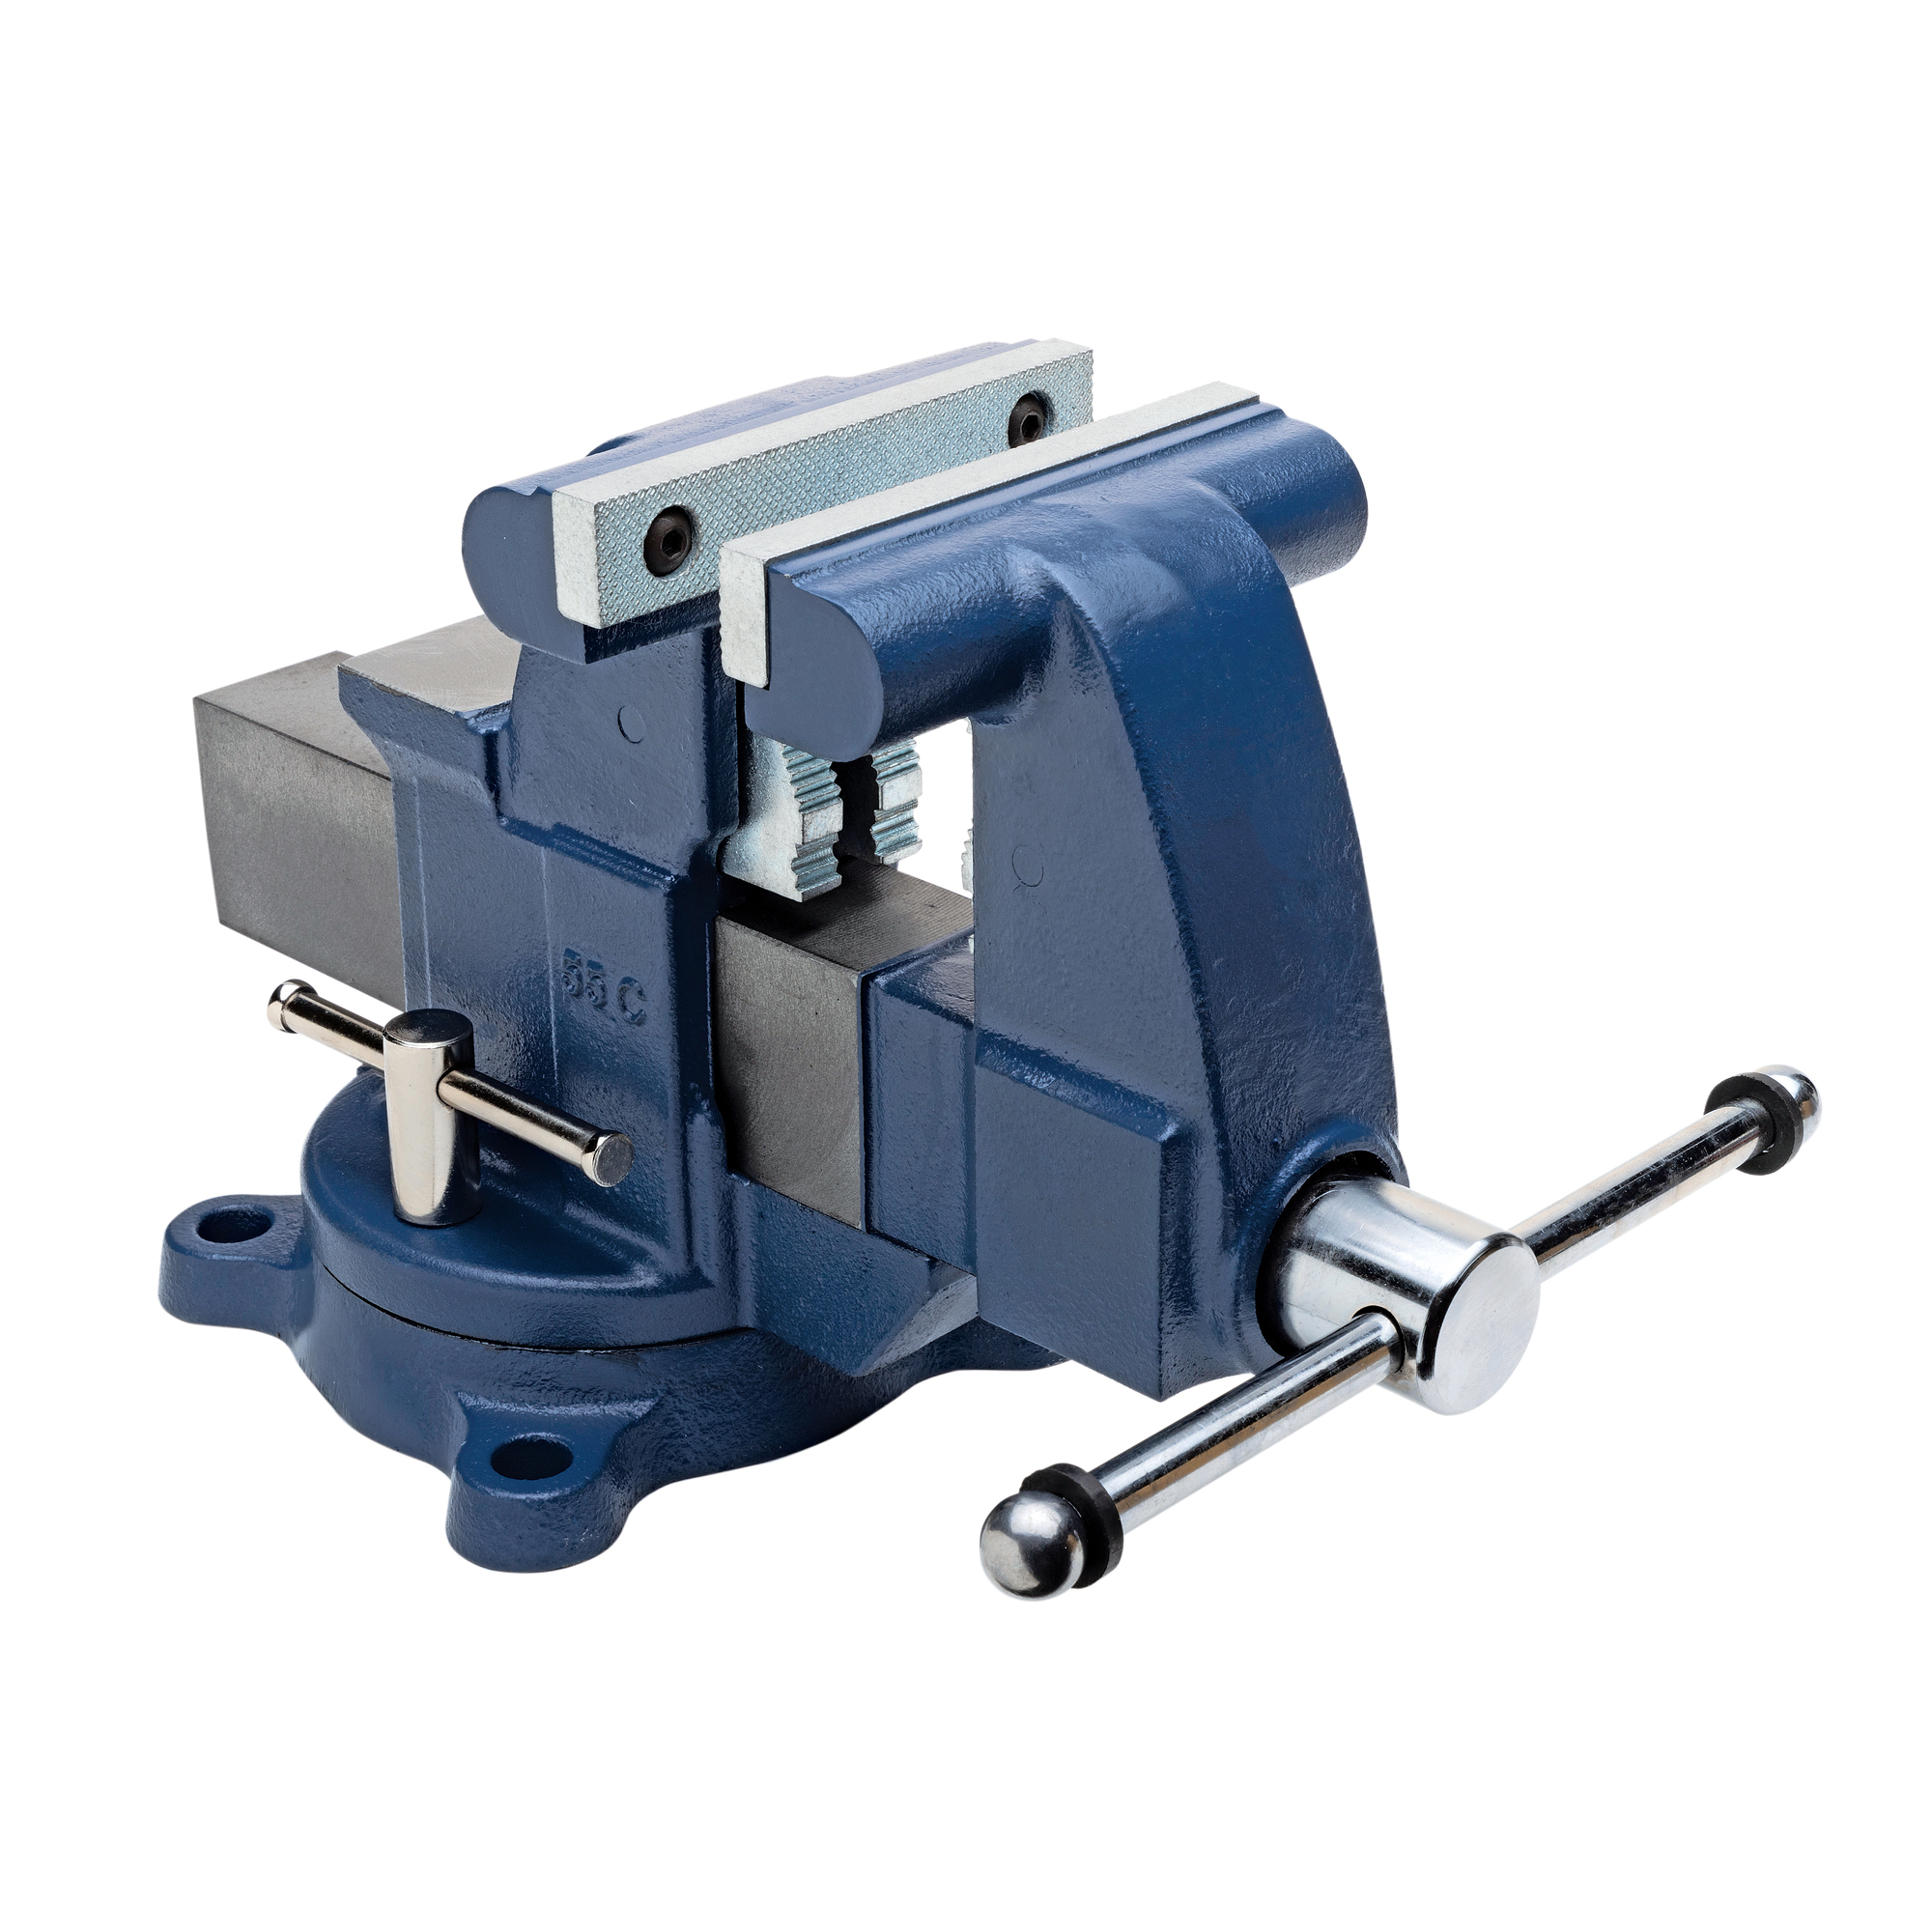 Yost Vises, 5.5Inch Tradesman Combo Vise, Jaw Width 5.5 in, Jaw Capacity 5 in, Material Ductile Iron, Model 55C